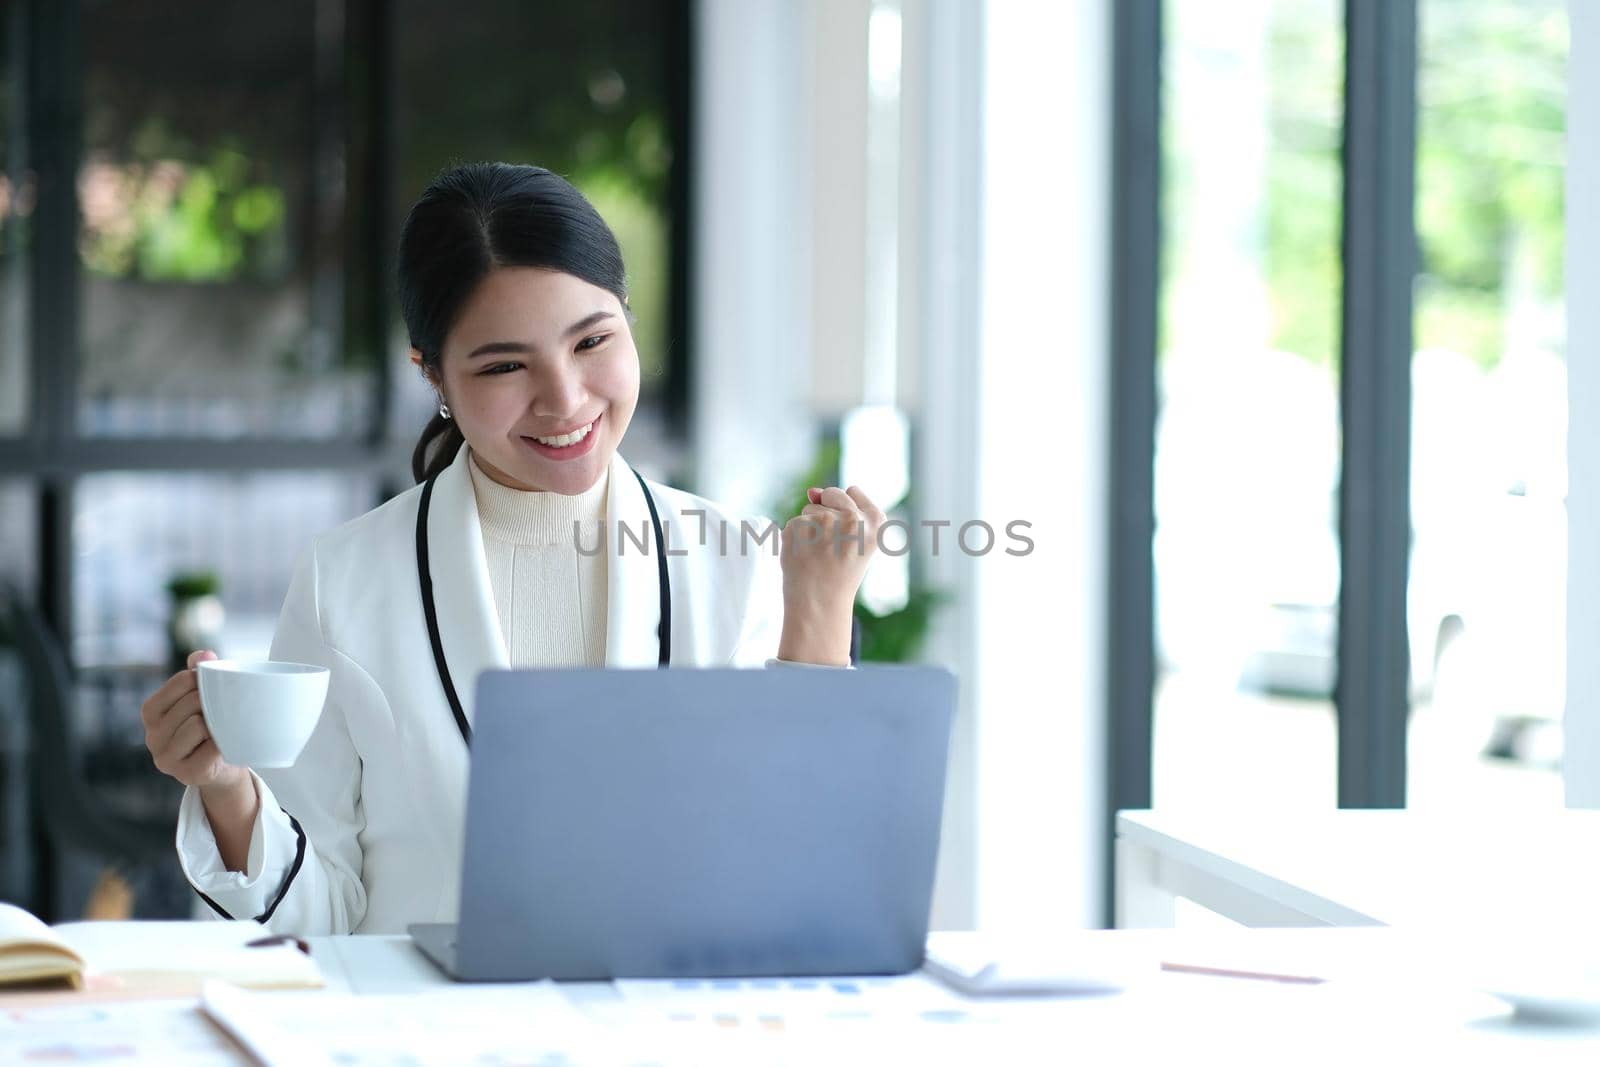 Pretty Asian businesswoman sitting on a laptop And the work came out successfully and the goal was achieved, happy and satisfied with her..